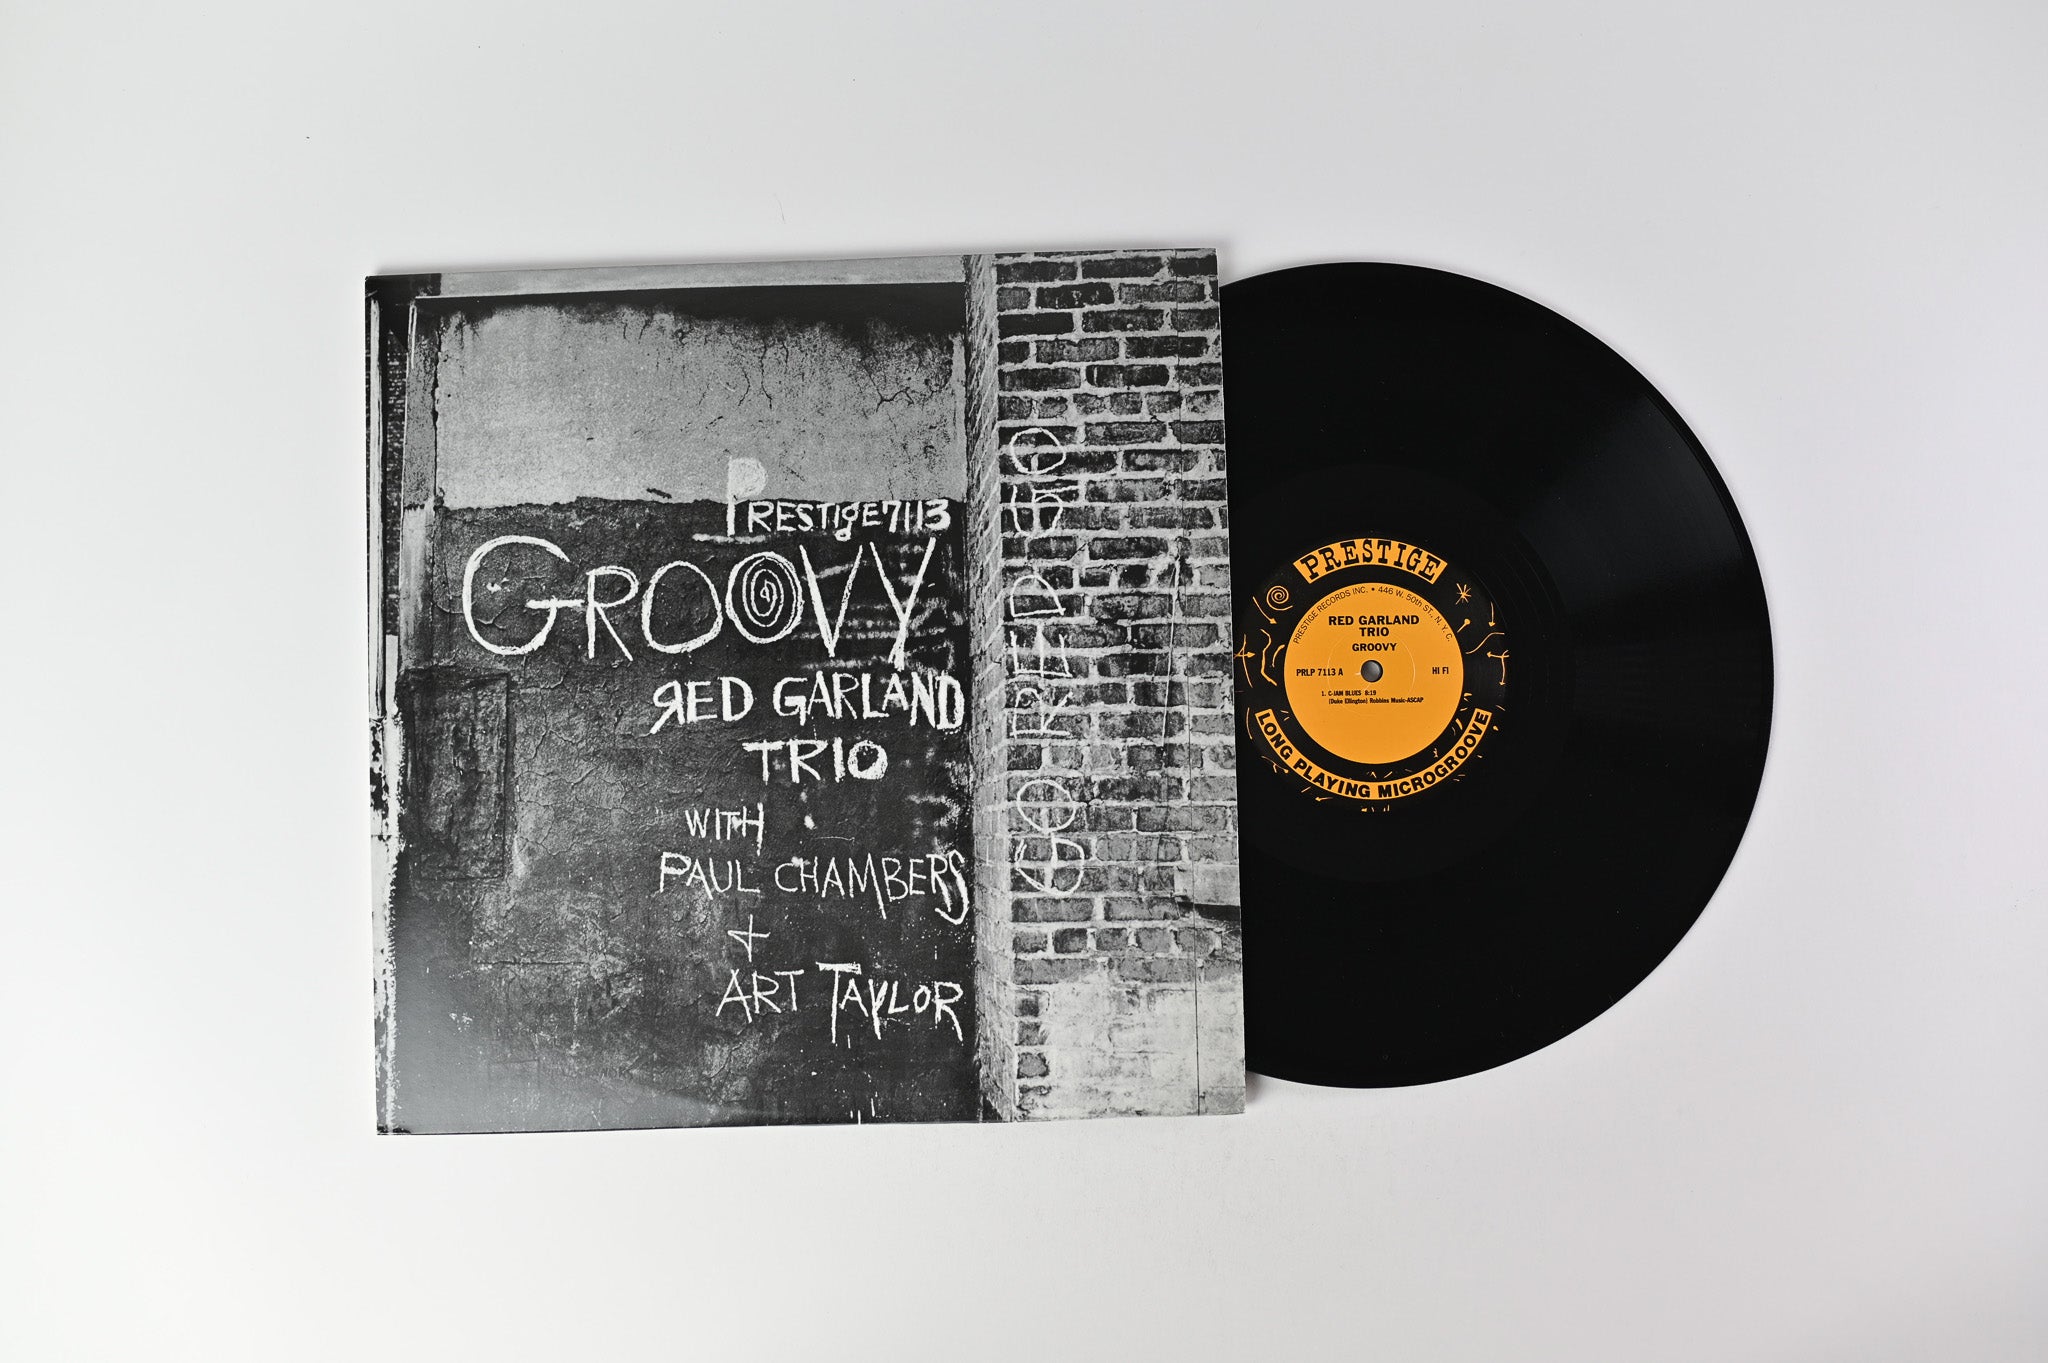 The Red Garland Trio - Groovy on Analogue Productions/Prestige